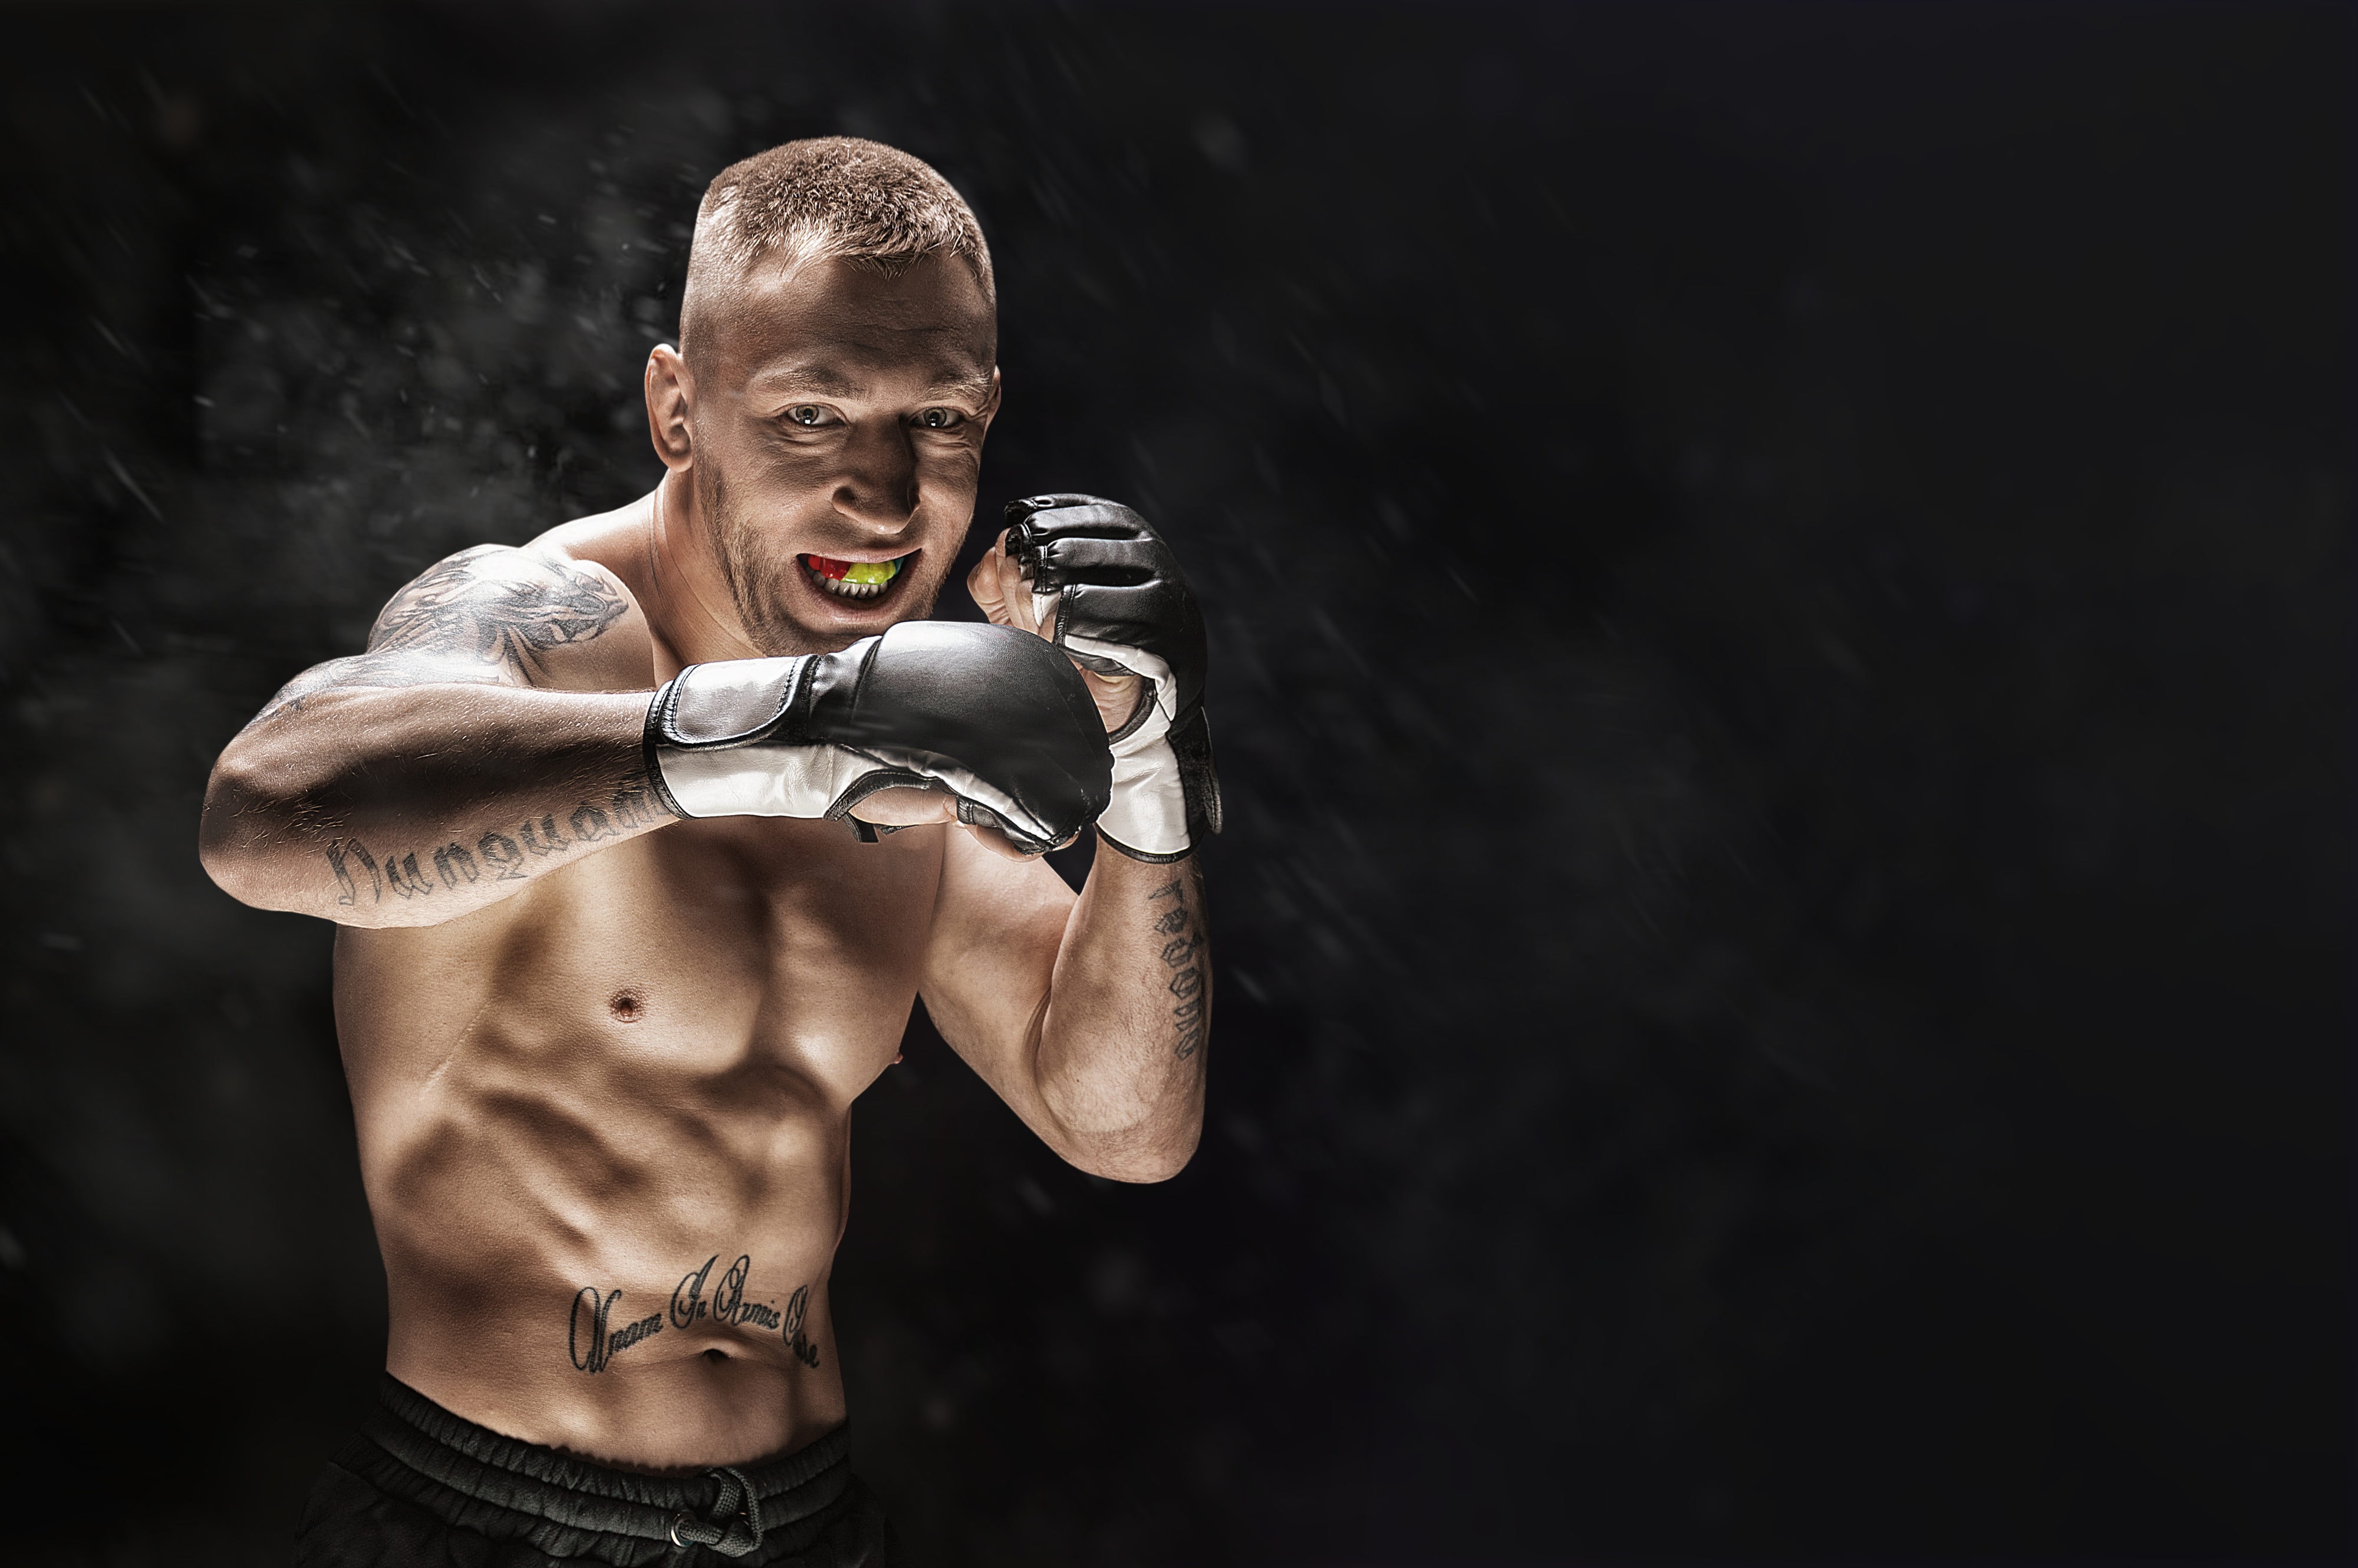 Mixed martial artist posing on a black background. Concept of mma, ufc, thai boxing, classic boxing.